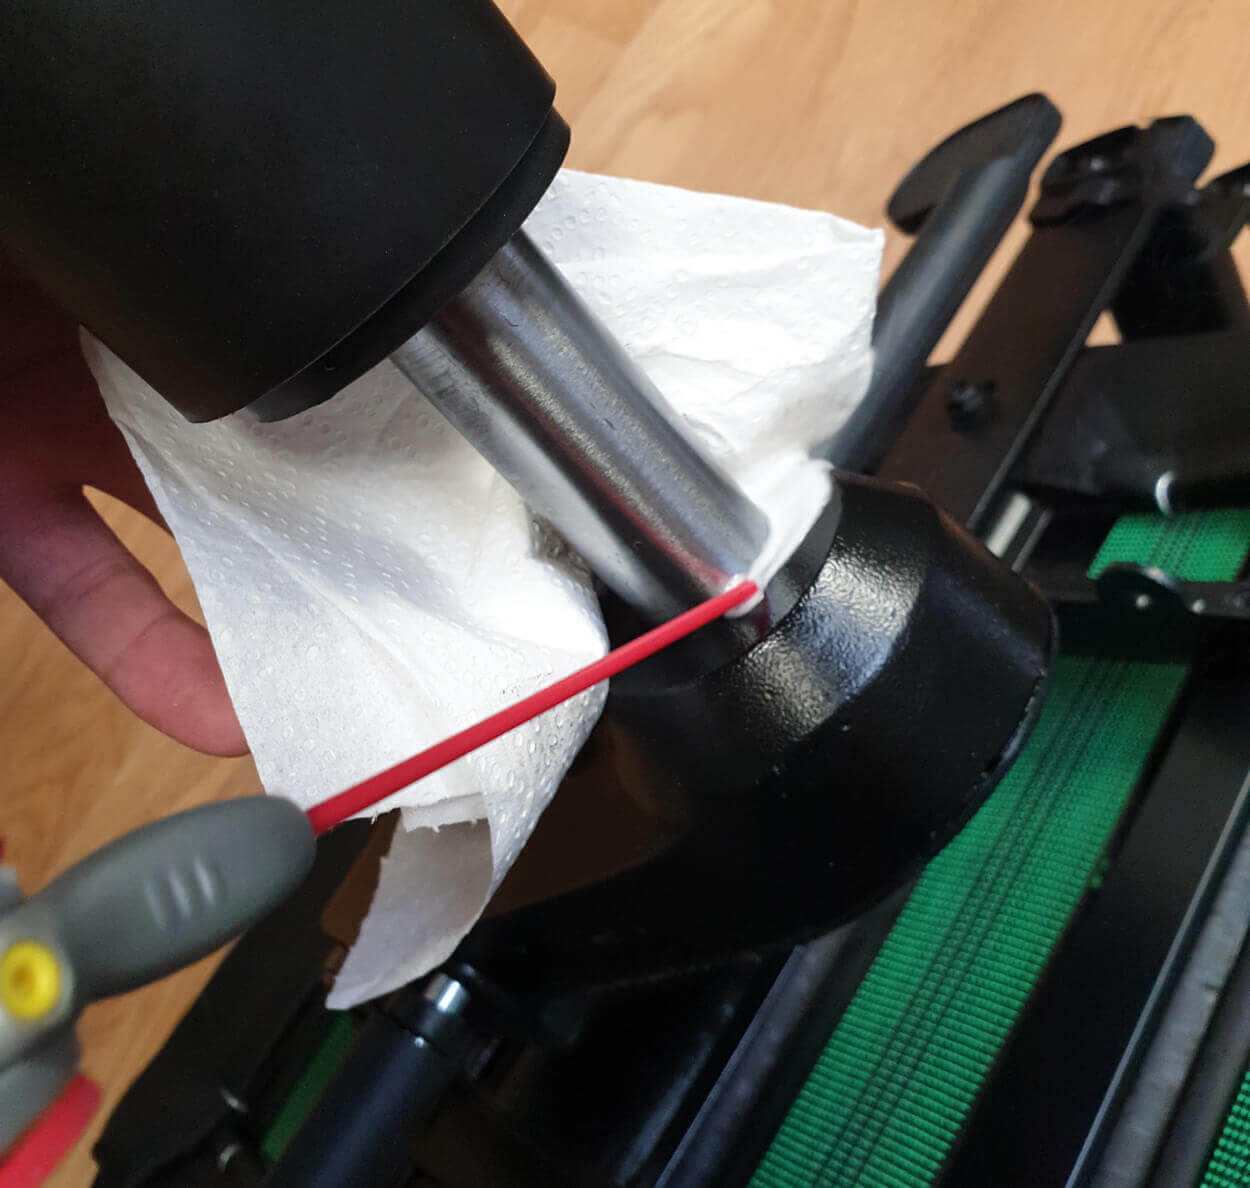 How to fix squeaking chair noises